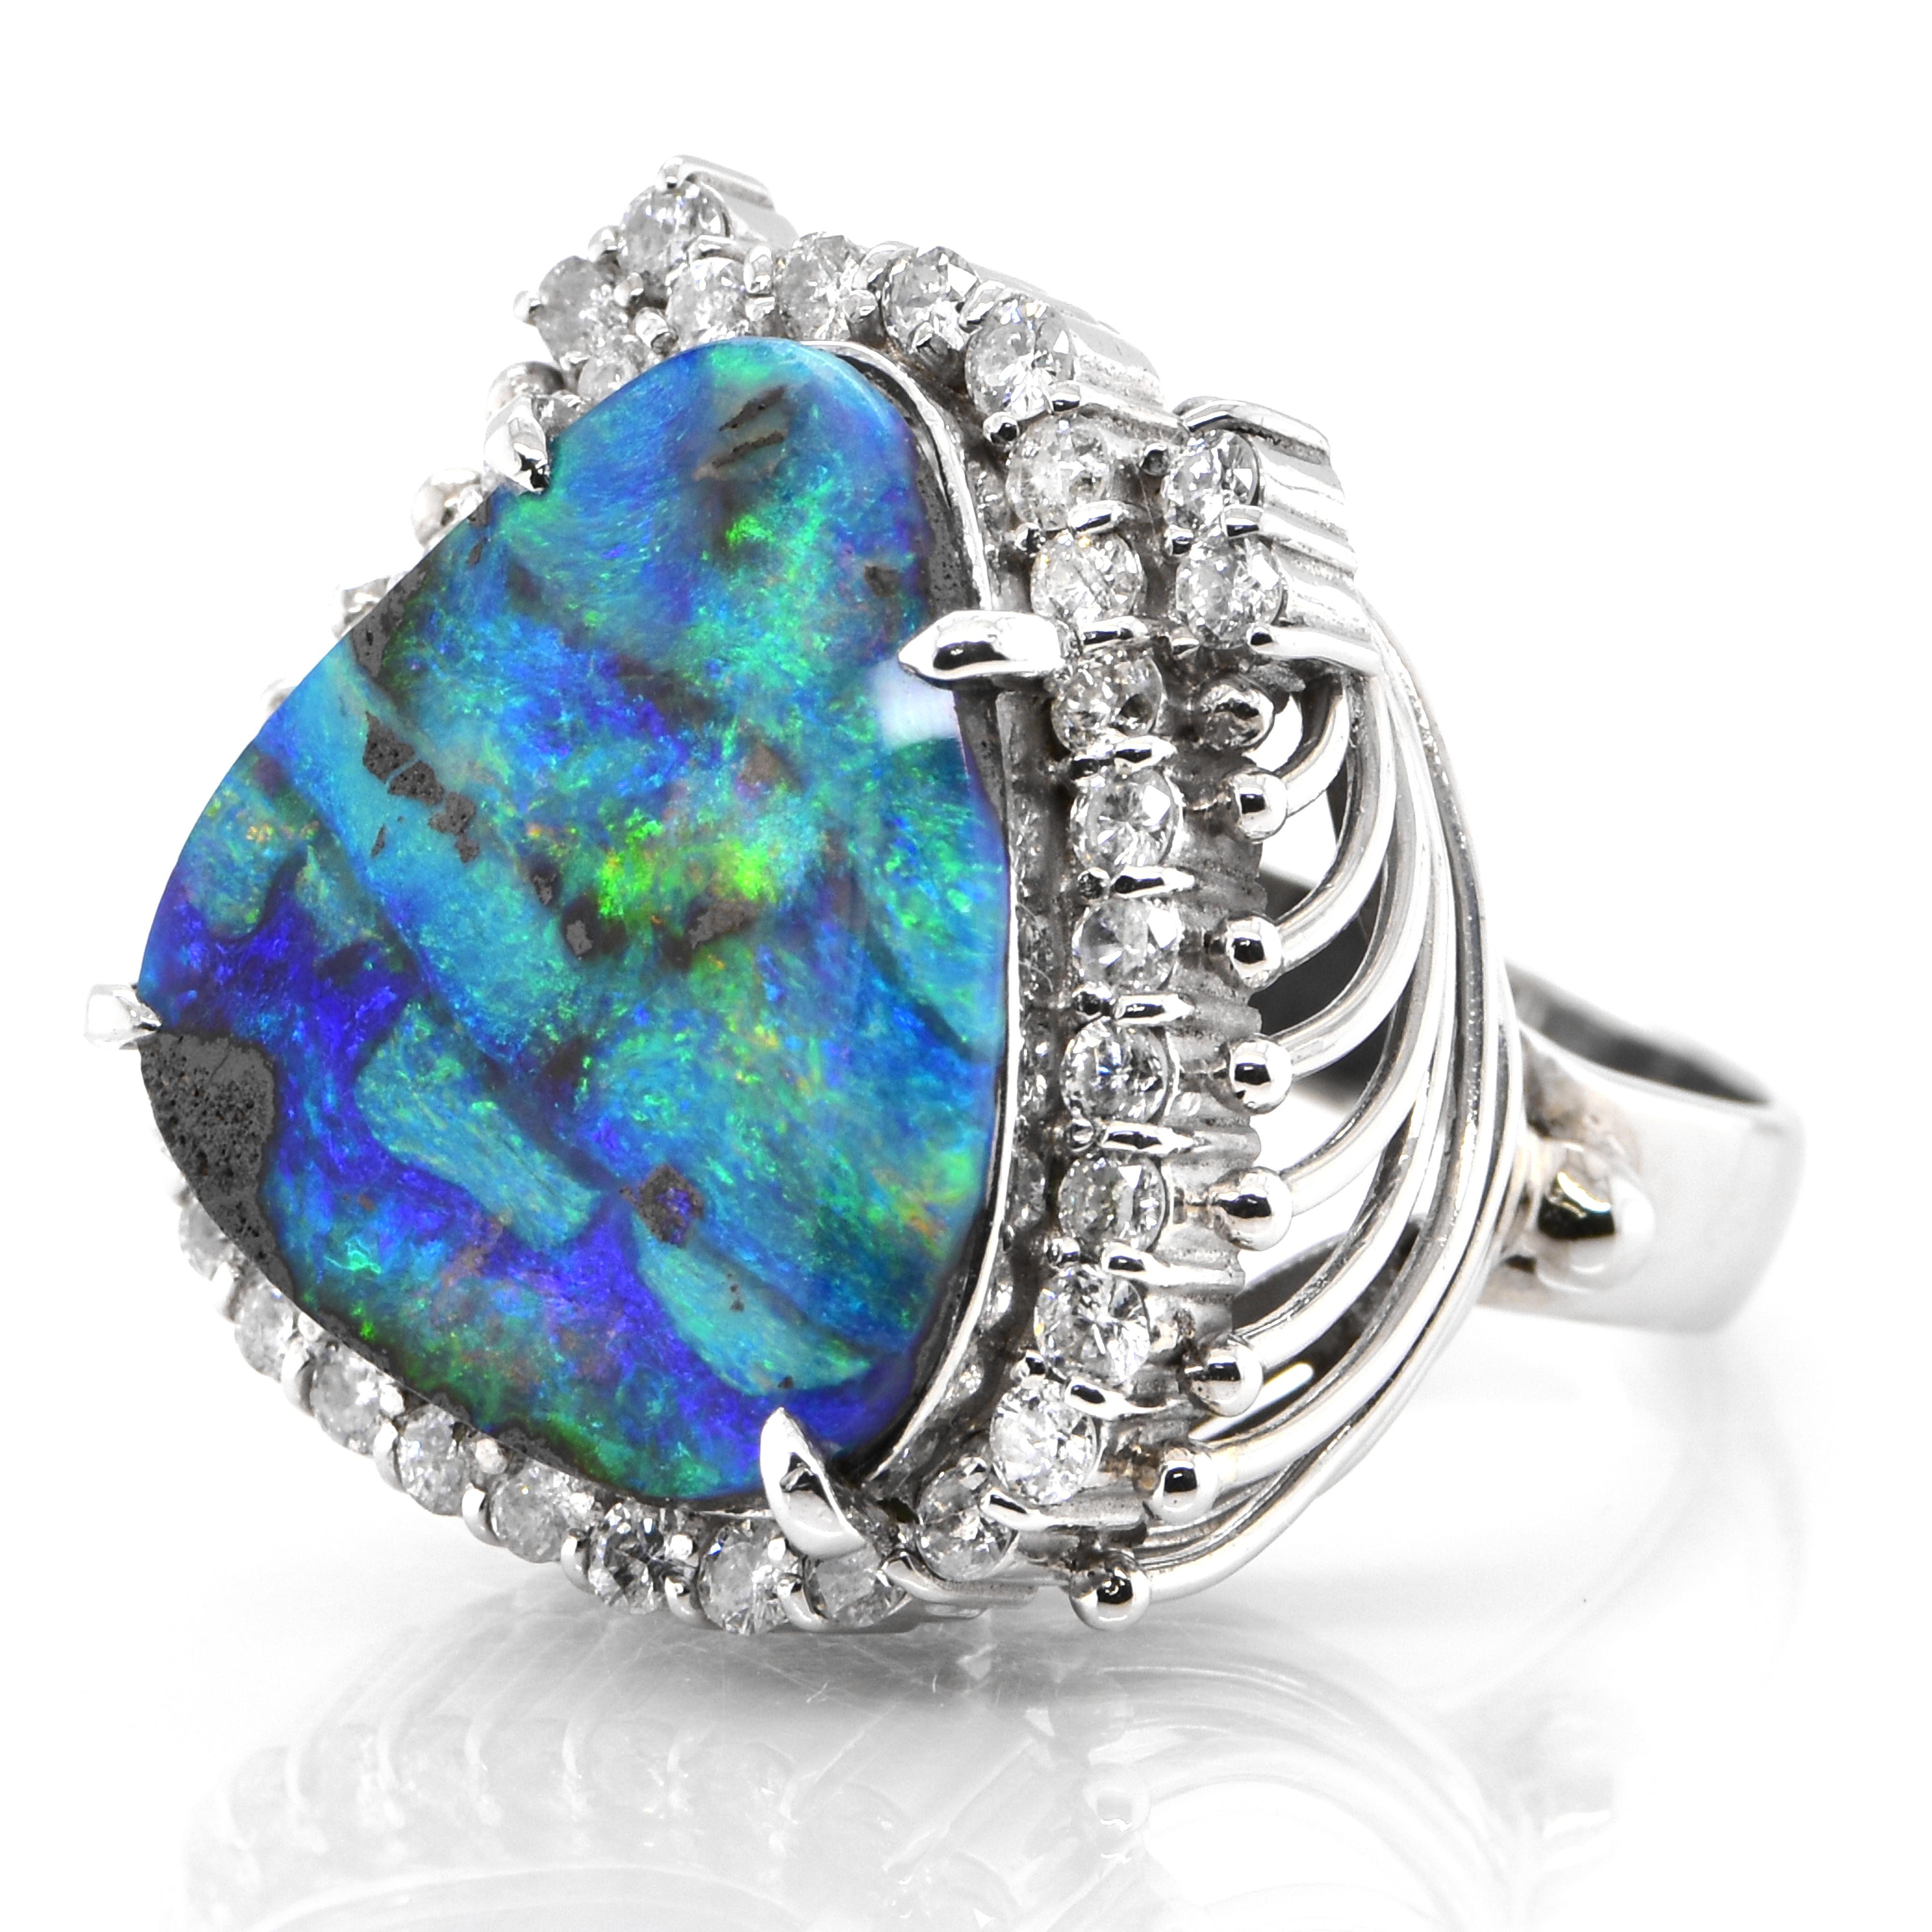 A beautiful ring featuring a 6.66 Carat, Natural, Australian Boulder Opal and 0.86 Carats of Diamond Accents set in Platinum. The Opal displays very good play of color! Opals are known for exhibiting flashes of rainbow colors known as 